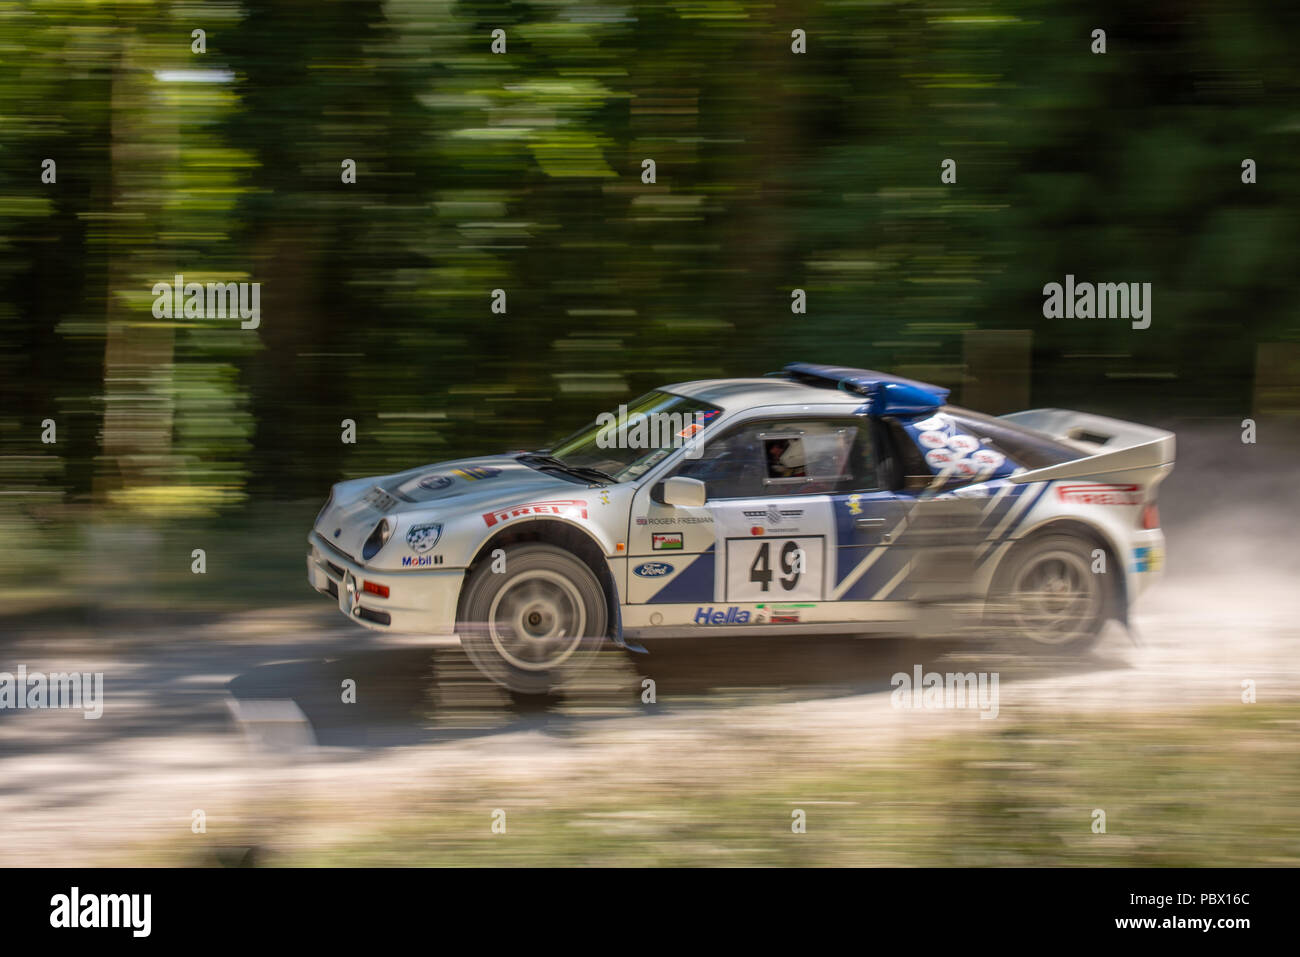 A Ford RS200 rally car lifts the front wheels as it leaves the jump on the forest rally stages at the Goodwood Festival of Speed 2018 Stock Photo